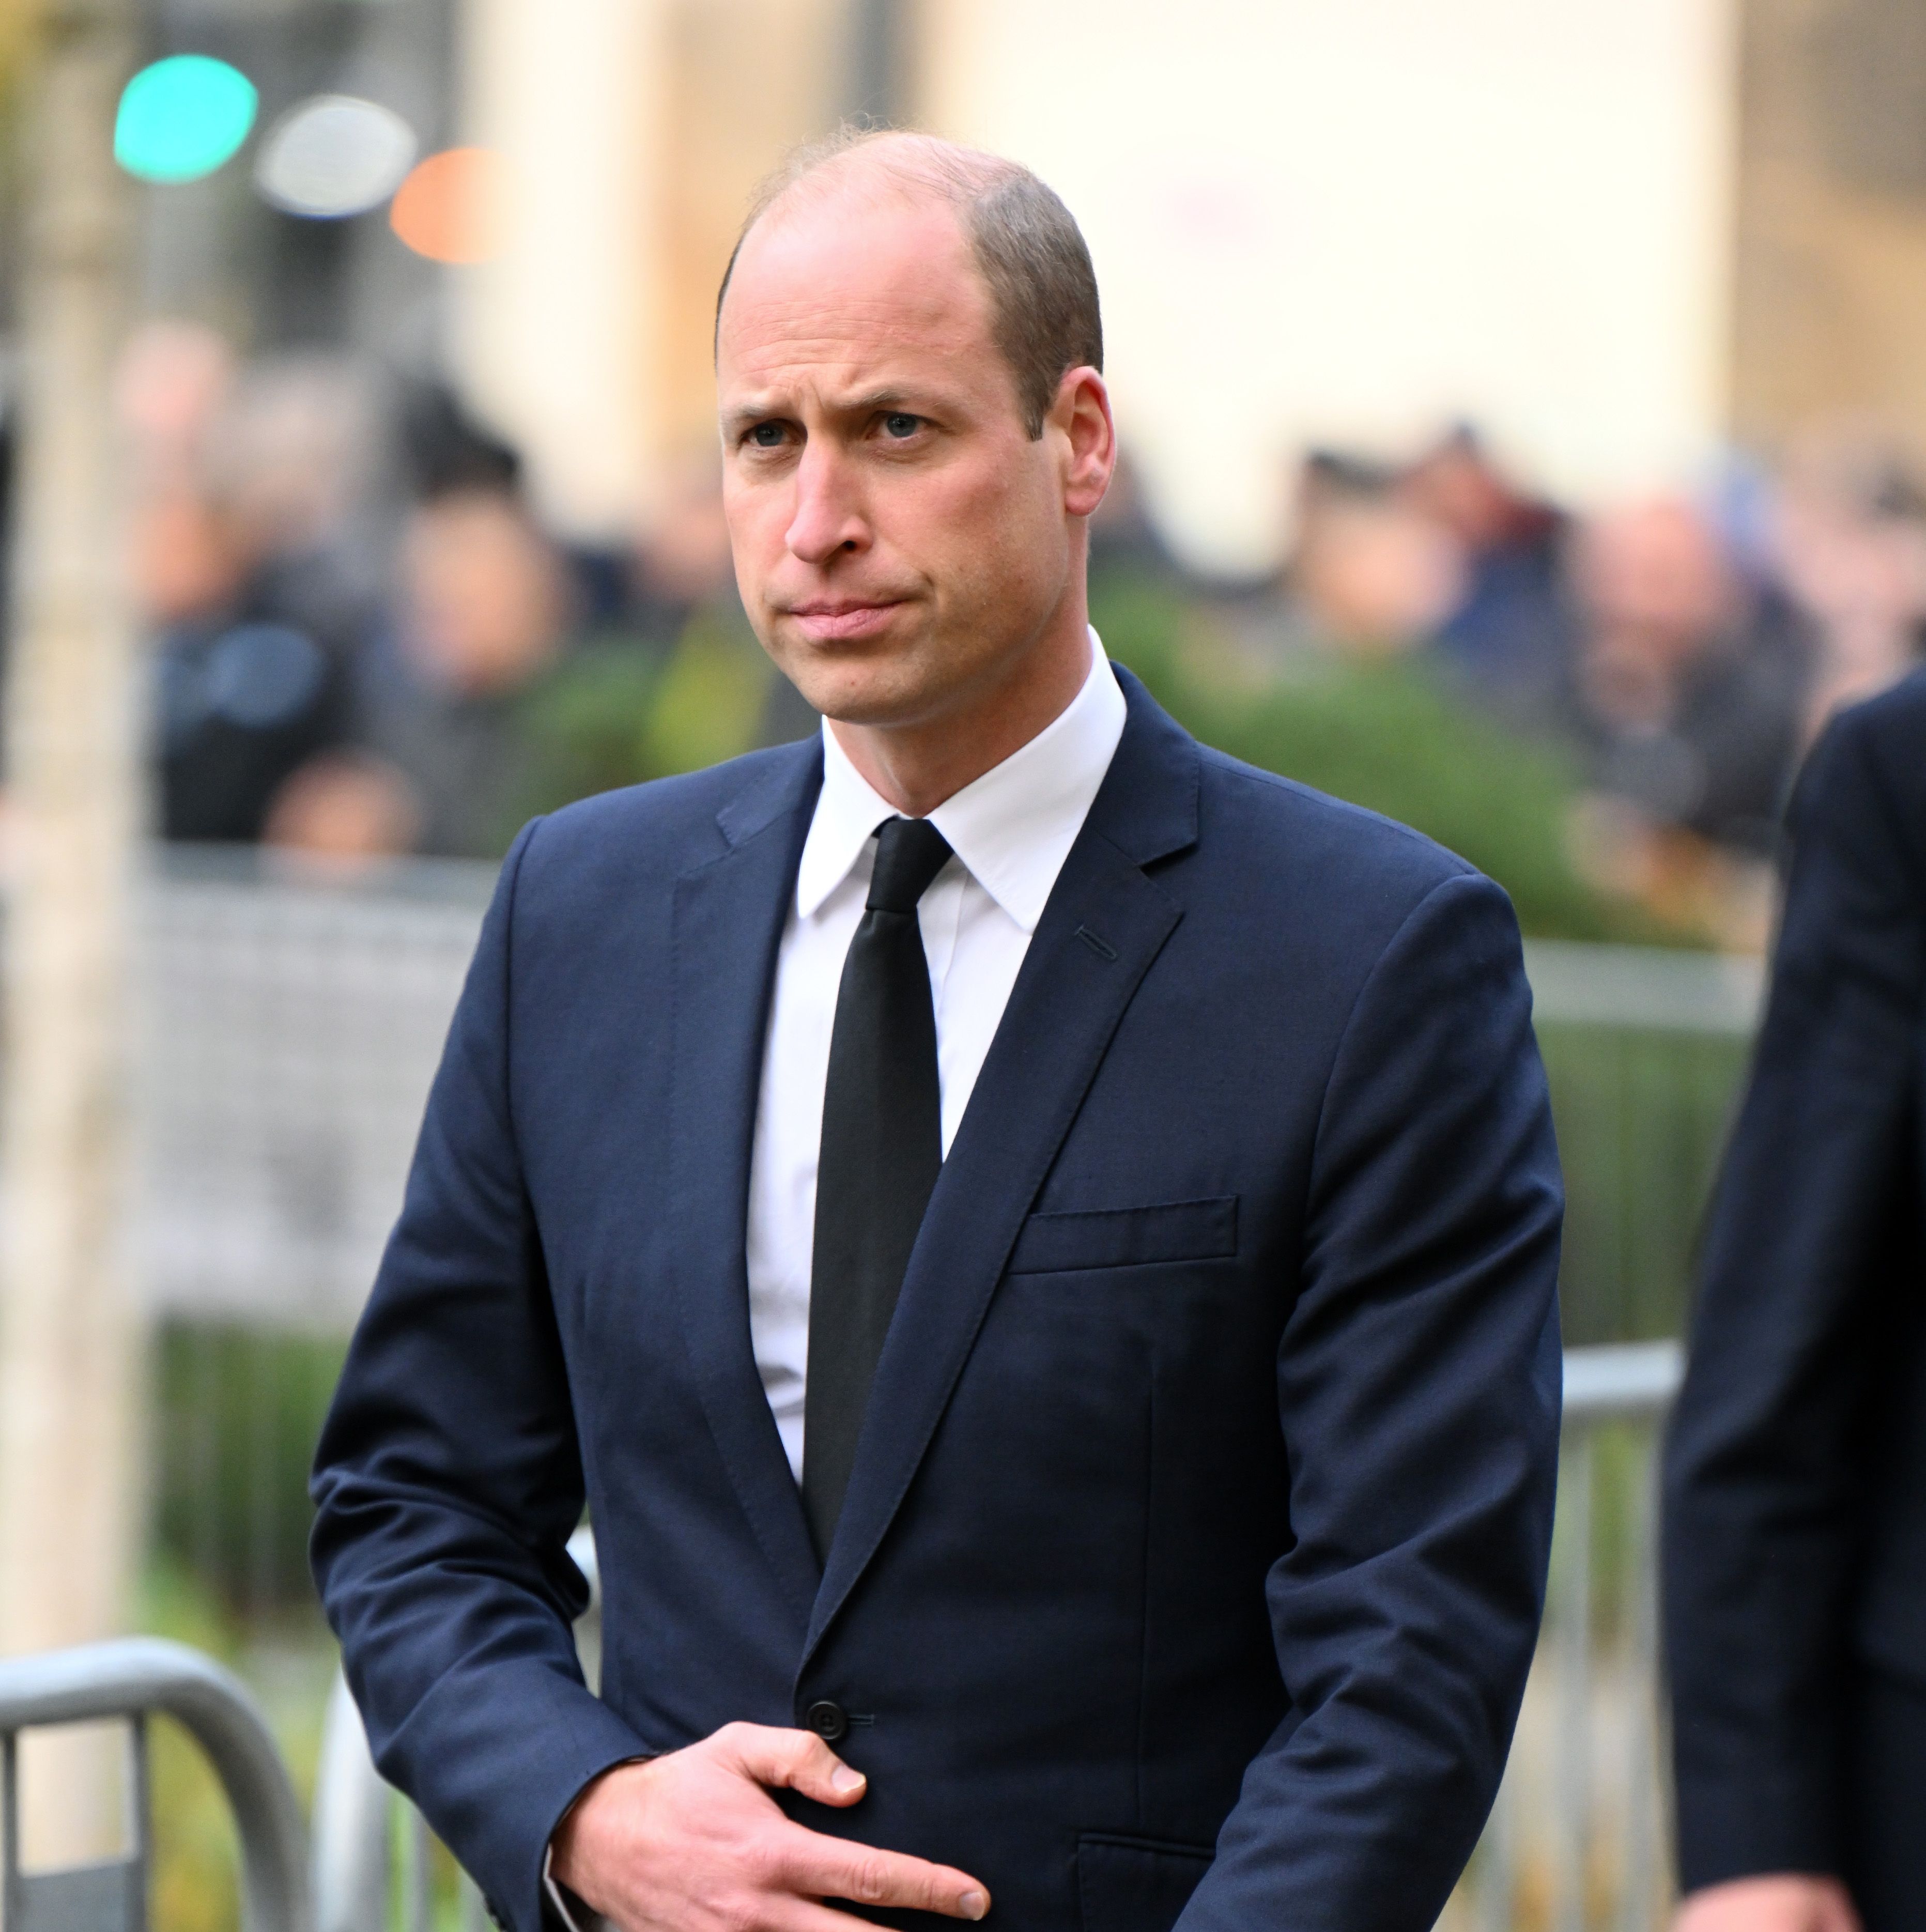 Royal Experts Say Prince William Pulling Out of Memorial Is 